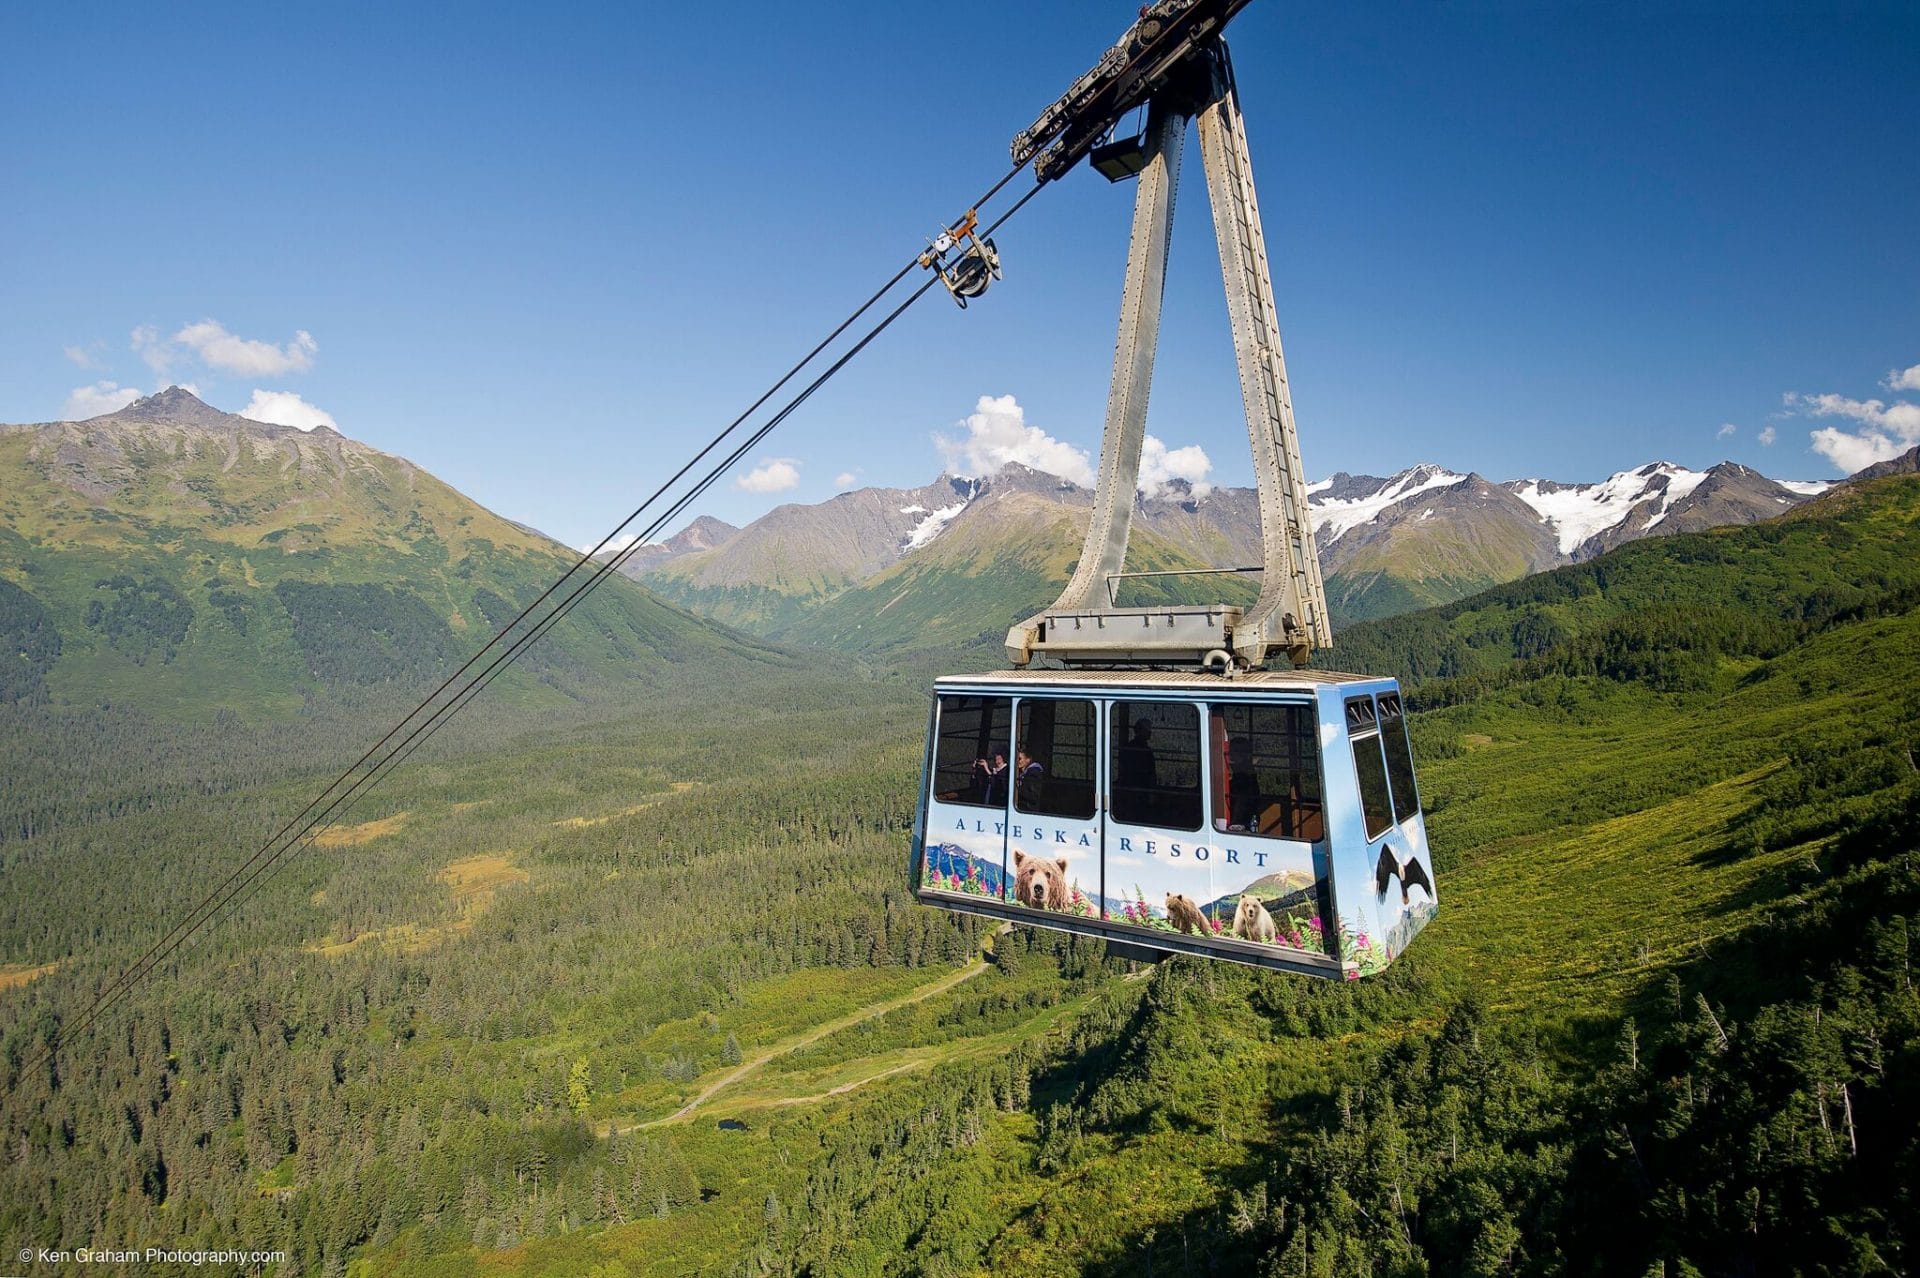 Mt Alyeska tram on the way over trees mountains in the background